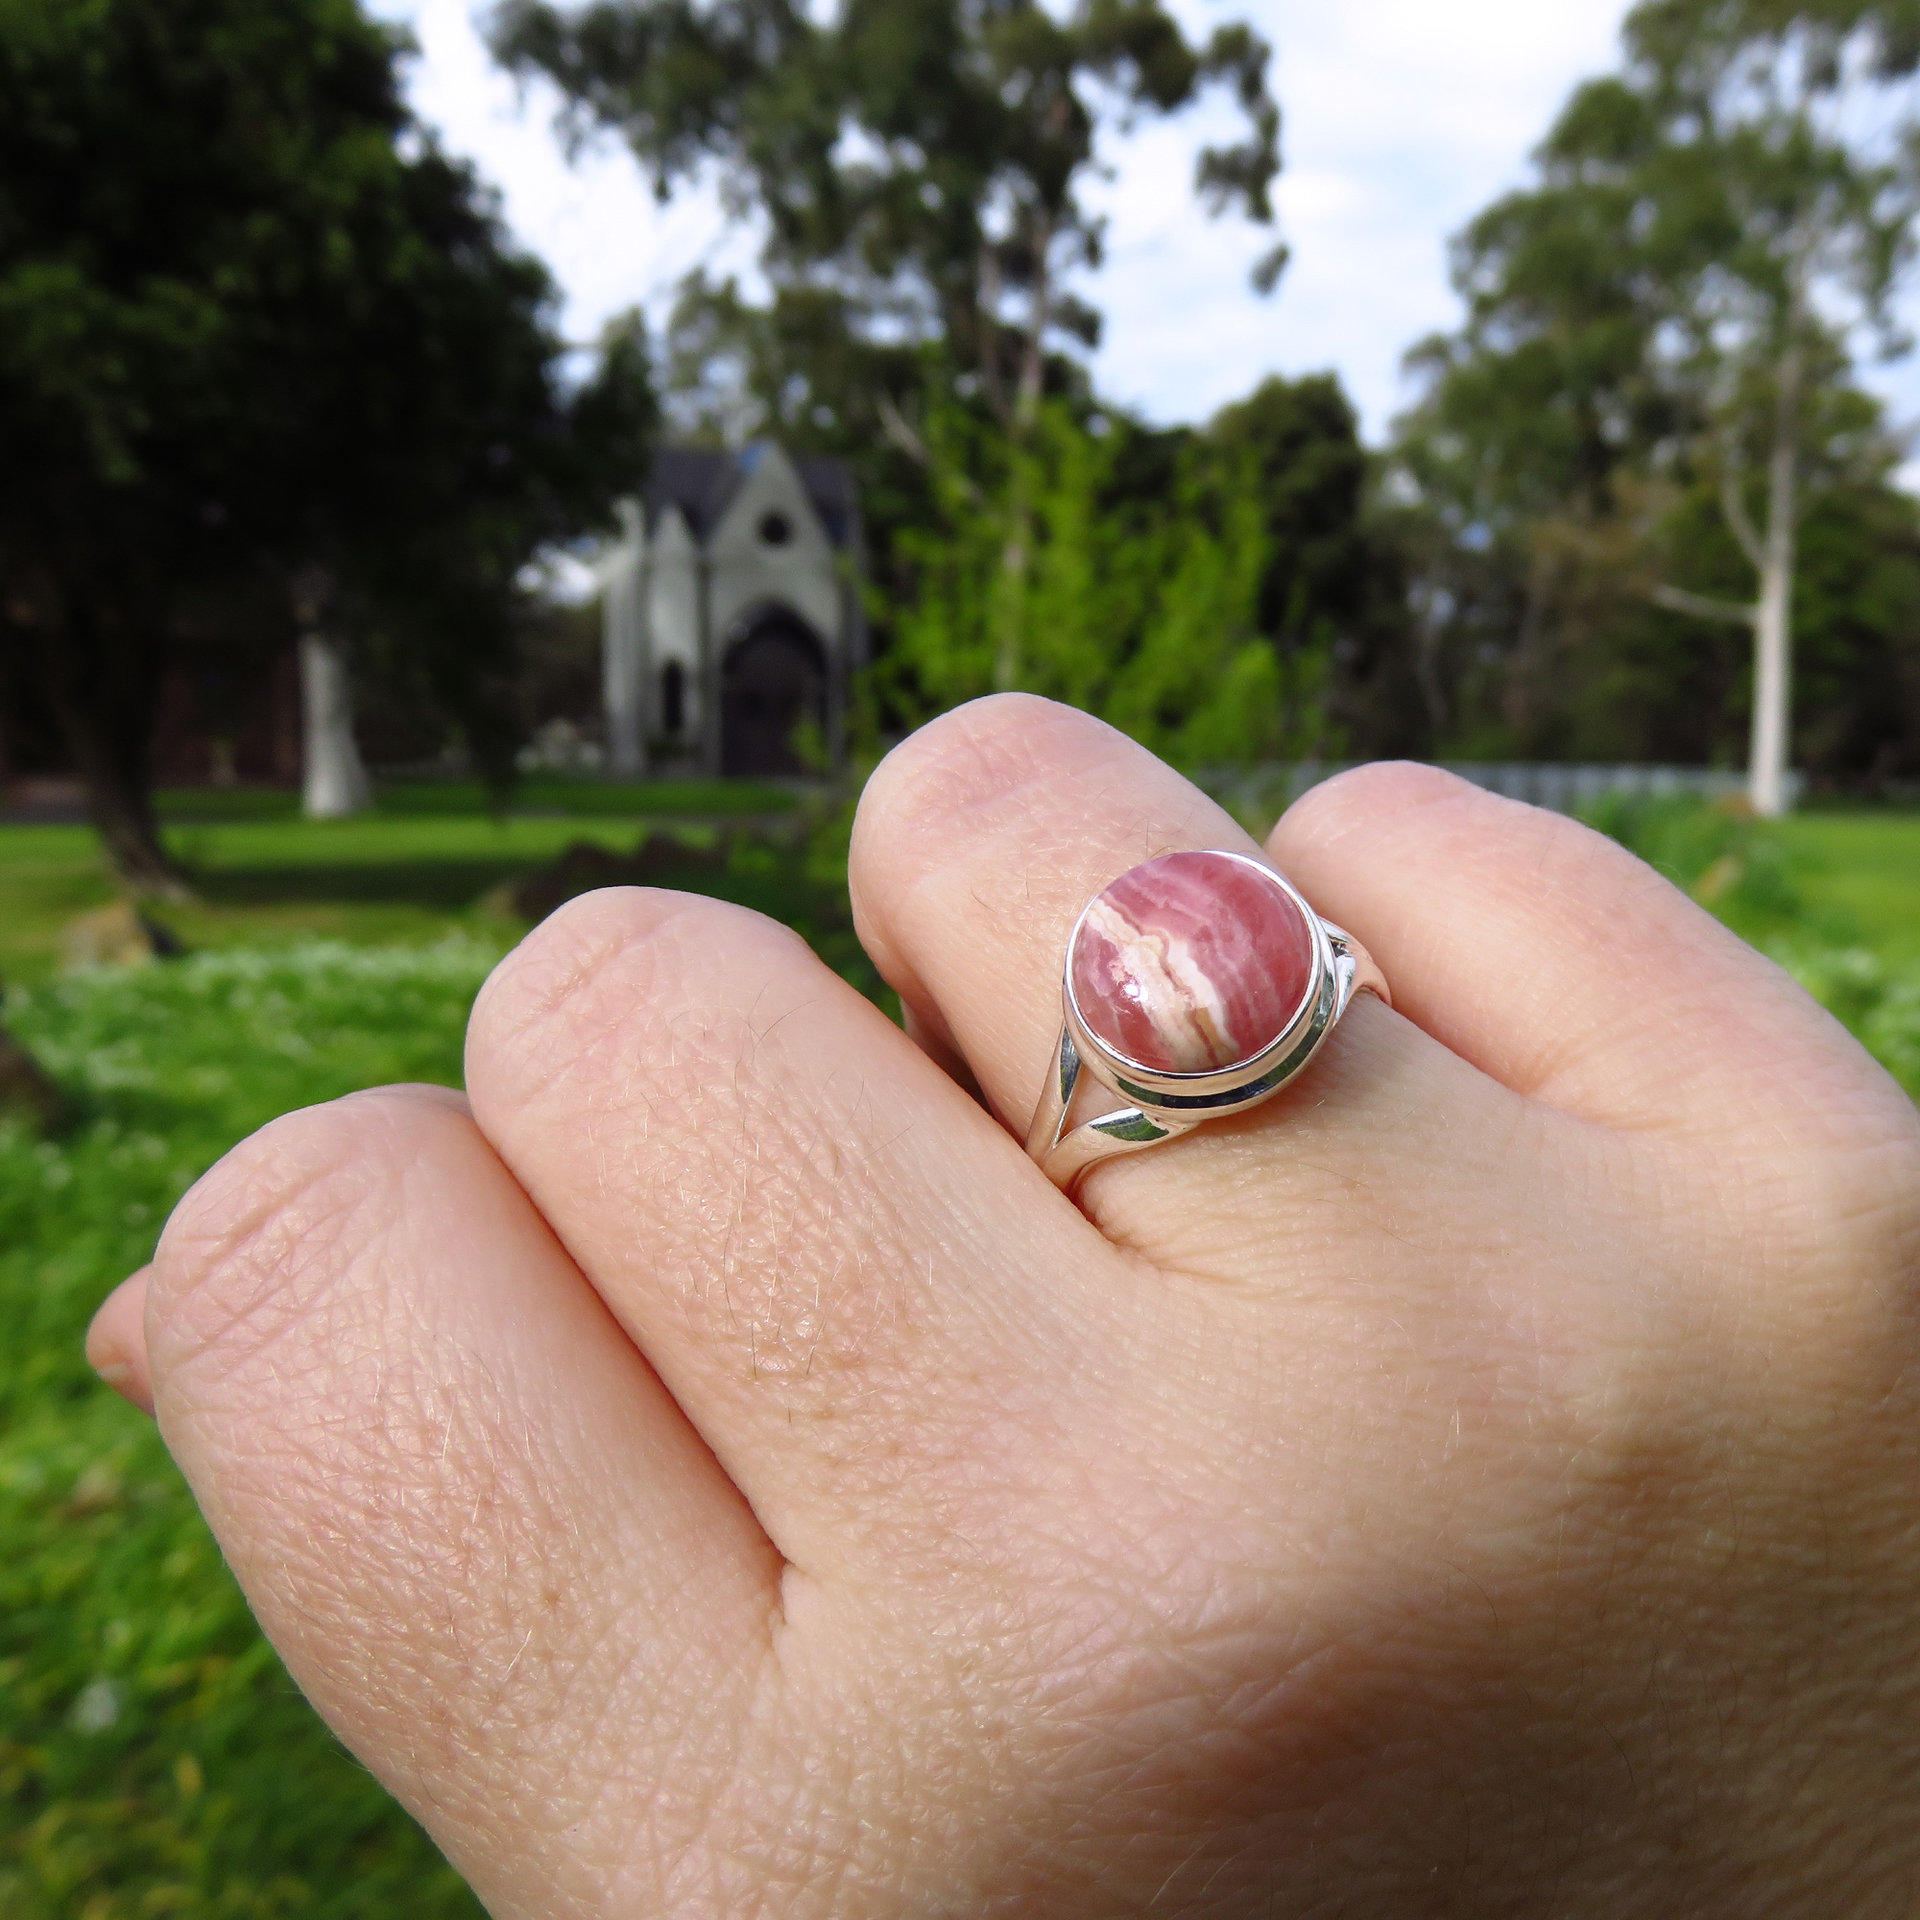 Rhodochrosite Ring Size 8, Round Cabochon, 925 Sterling Silver 